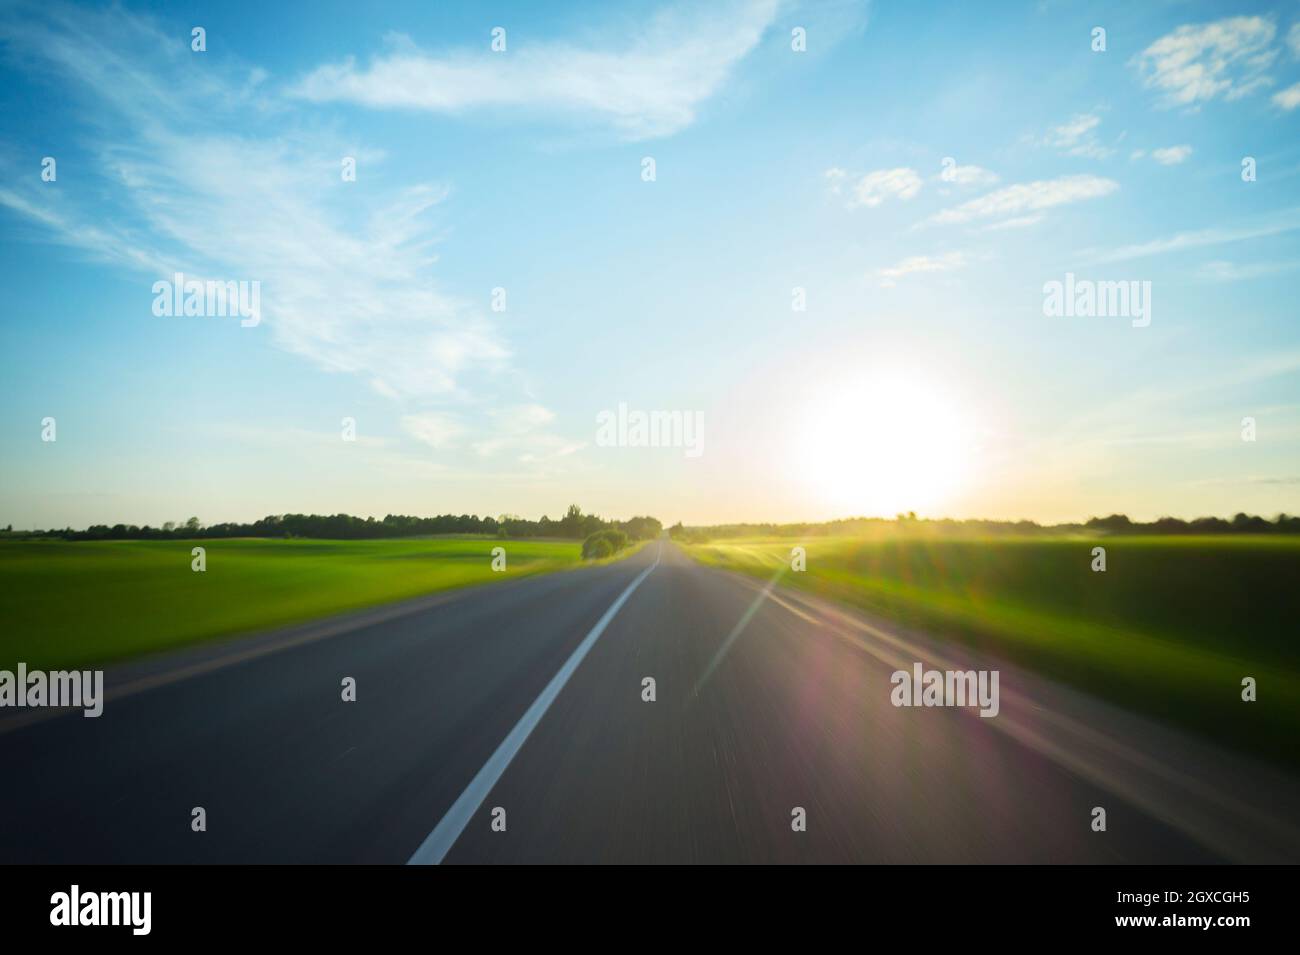 A journey through the rural road to the sun, motion blur Stock Photo